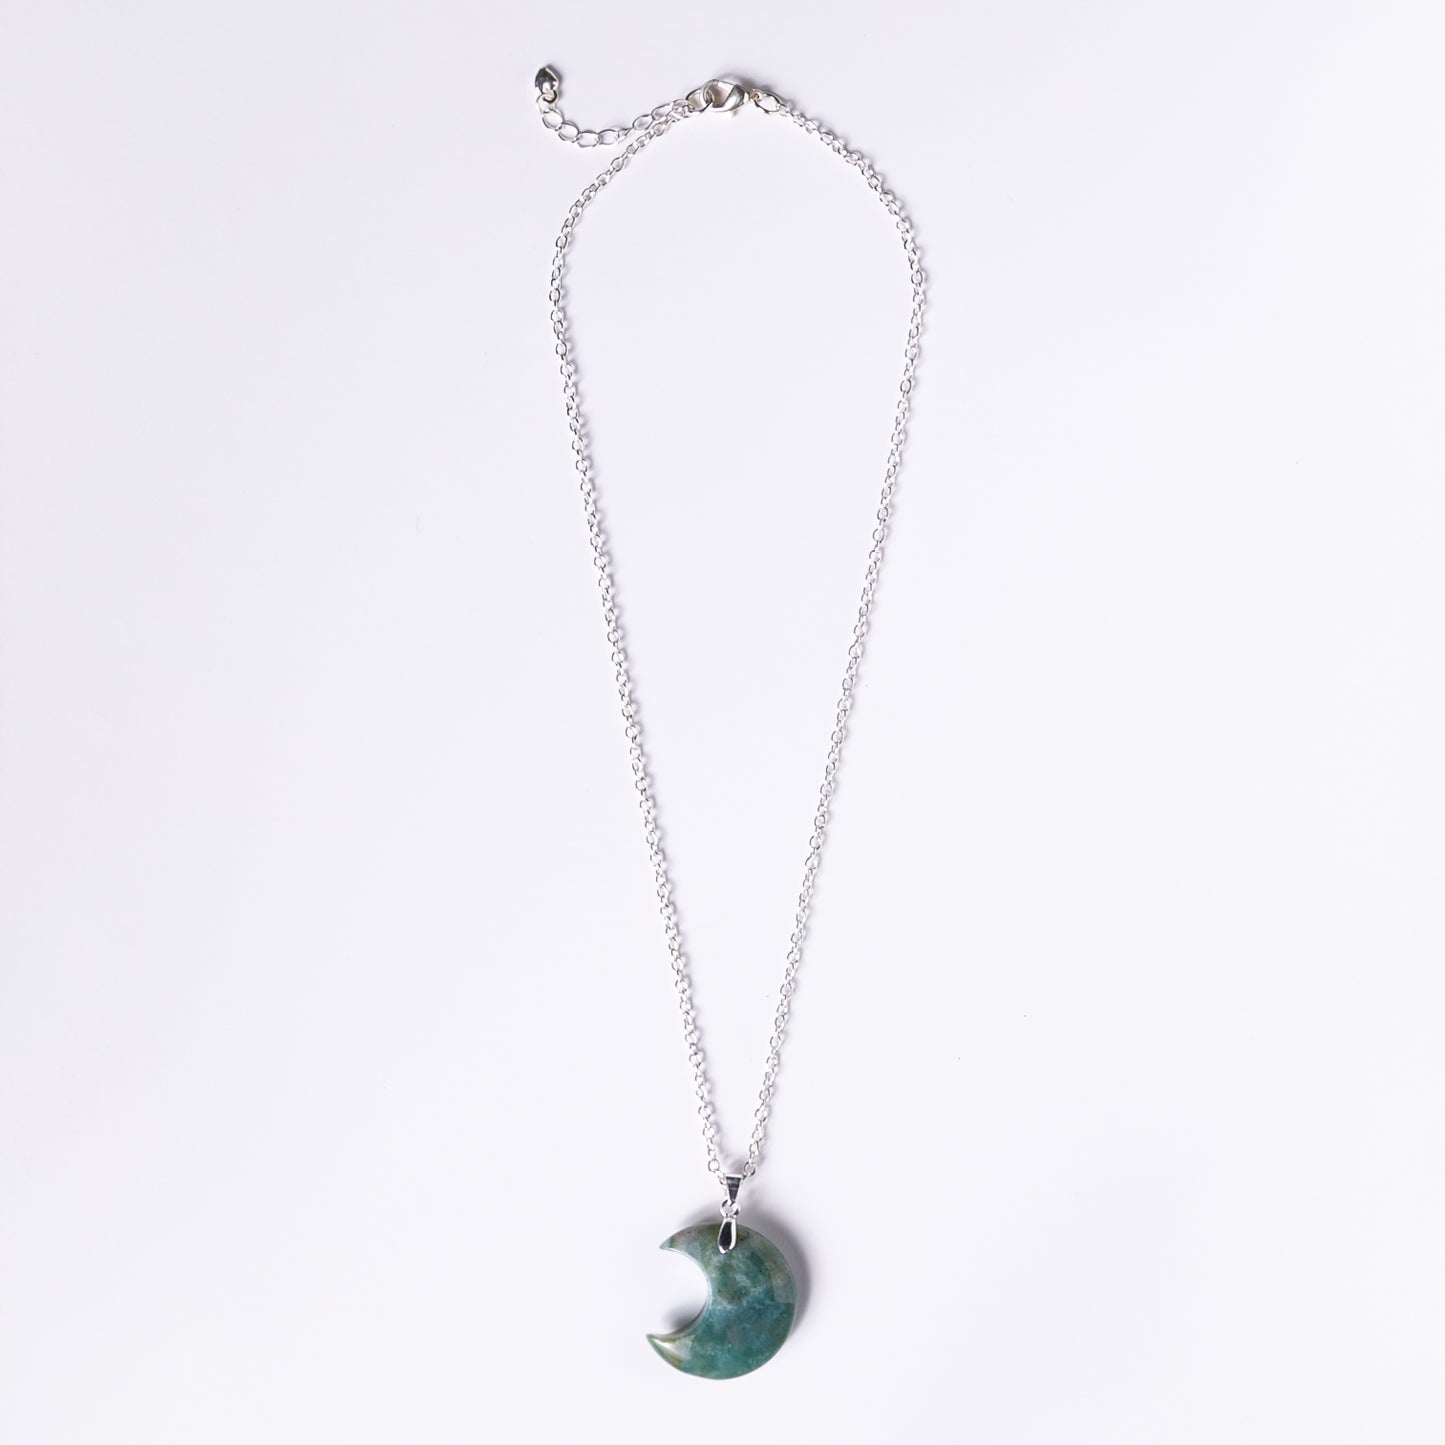 Crescent Moon Gemstone Pendant Necklace - Moss Agate